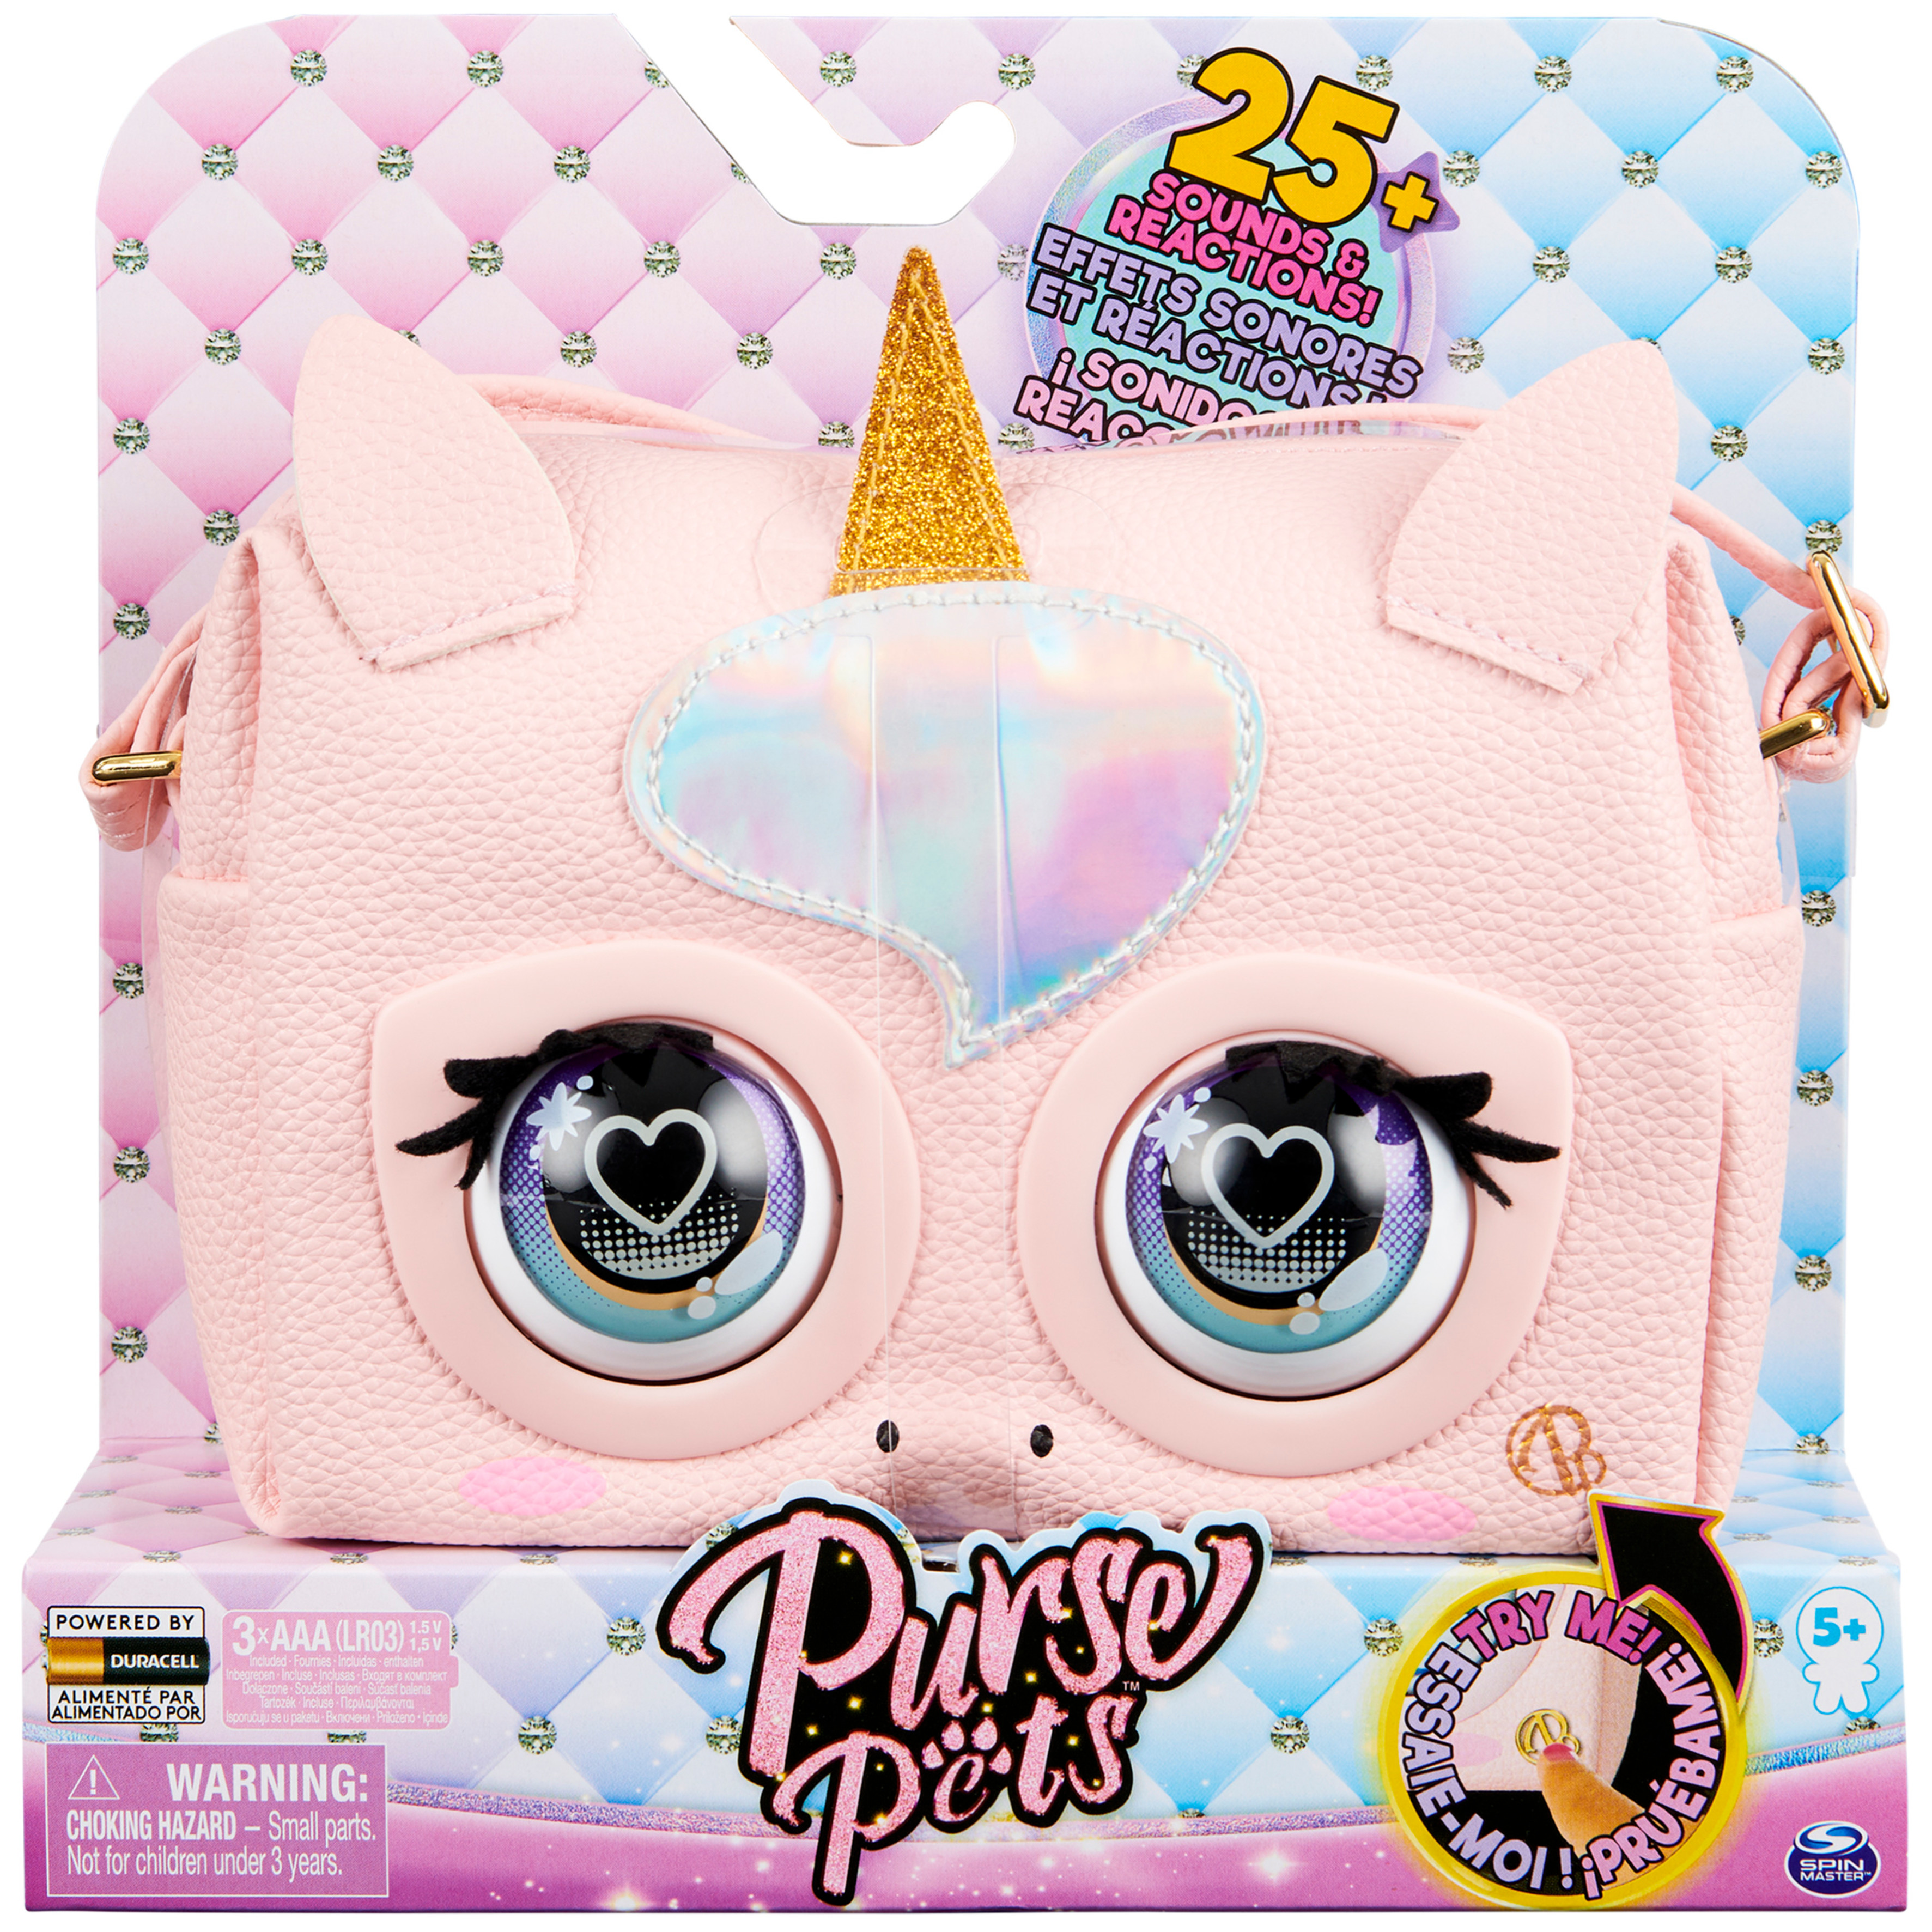 Purse Pets, Interactive Glamicorn with Over 25 Sounds and Reactions - image 1 of 8